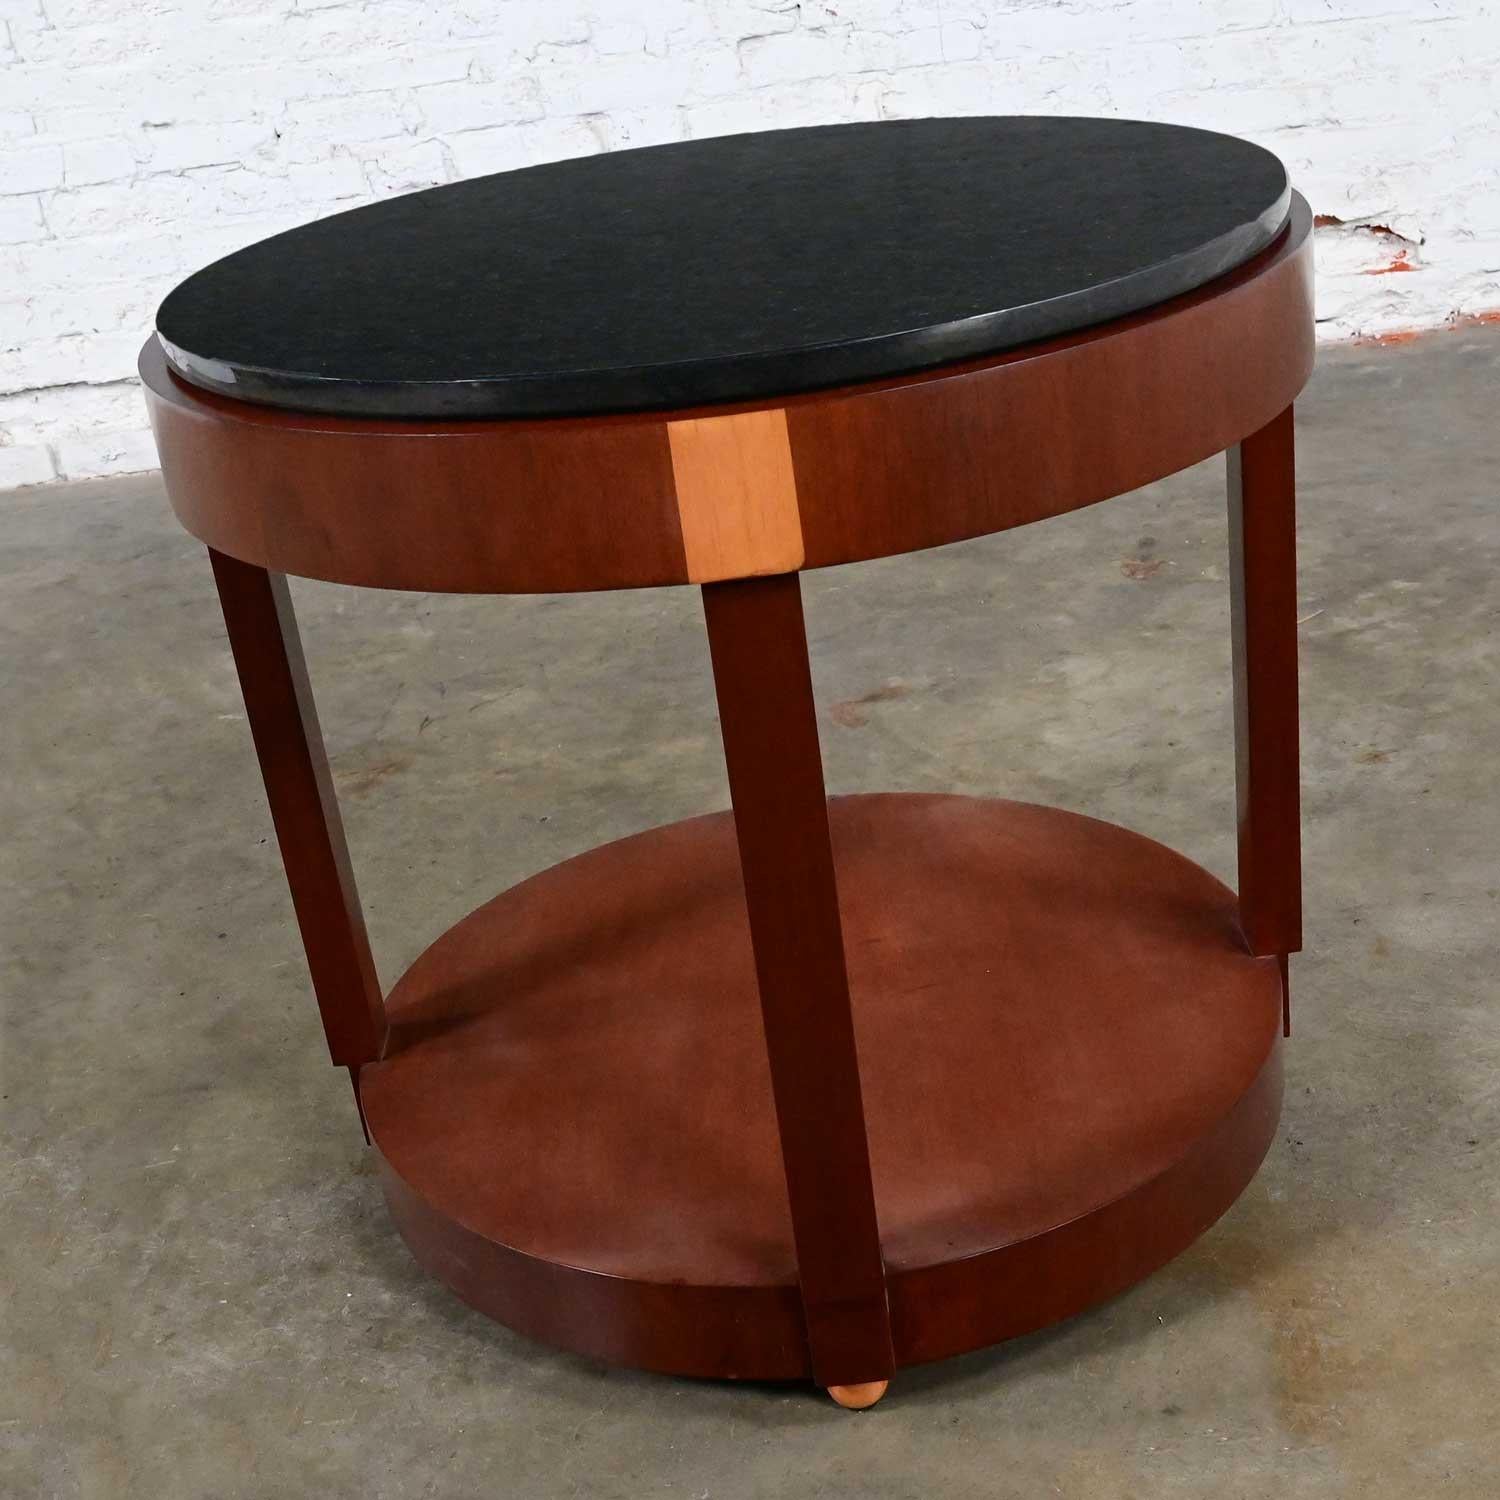 American Art Deco Revival Custom Two Toned Mahogany Round Side Table Black Granite Top For Sale